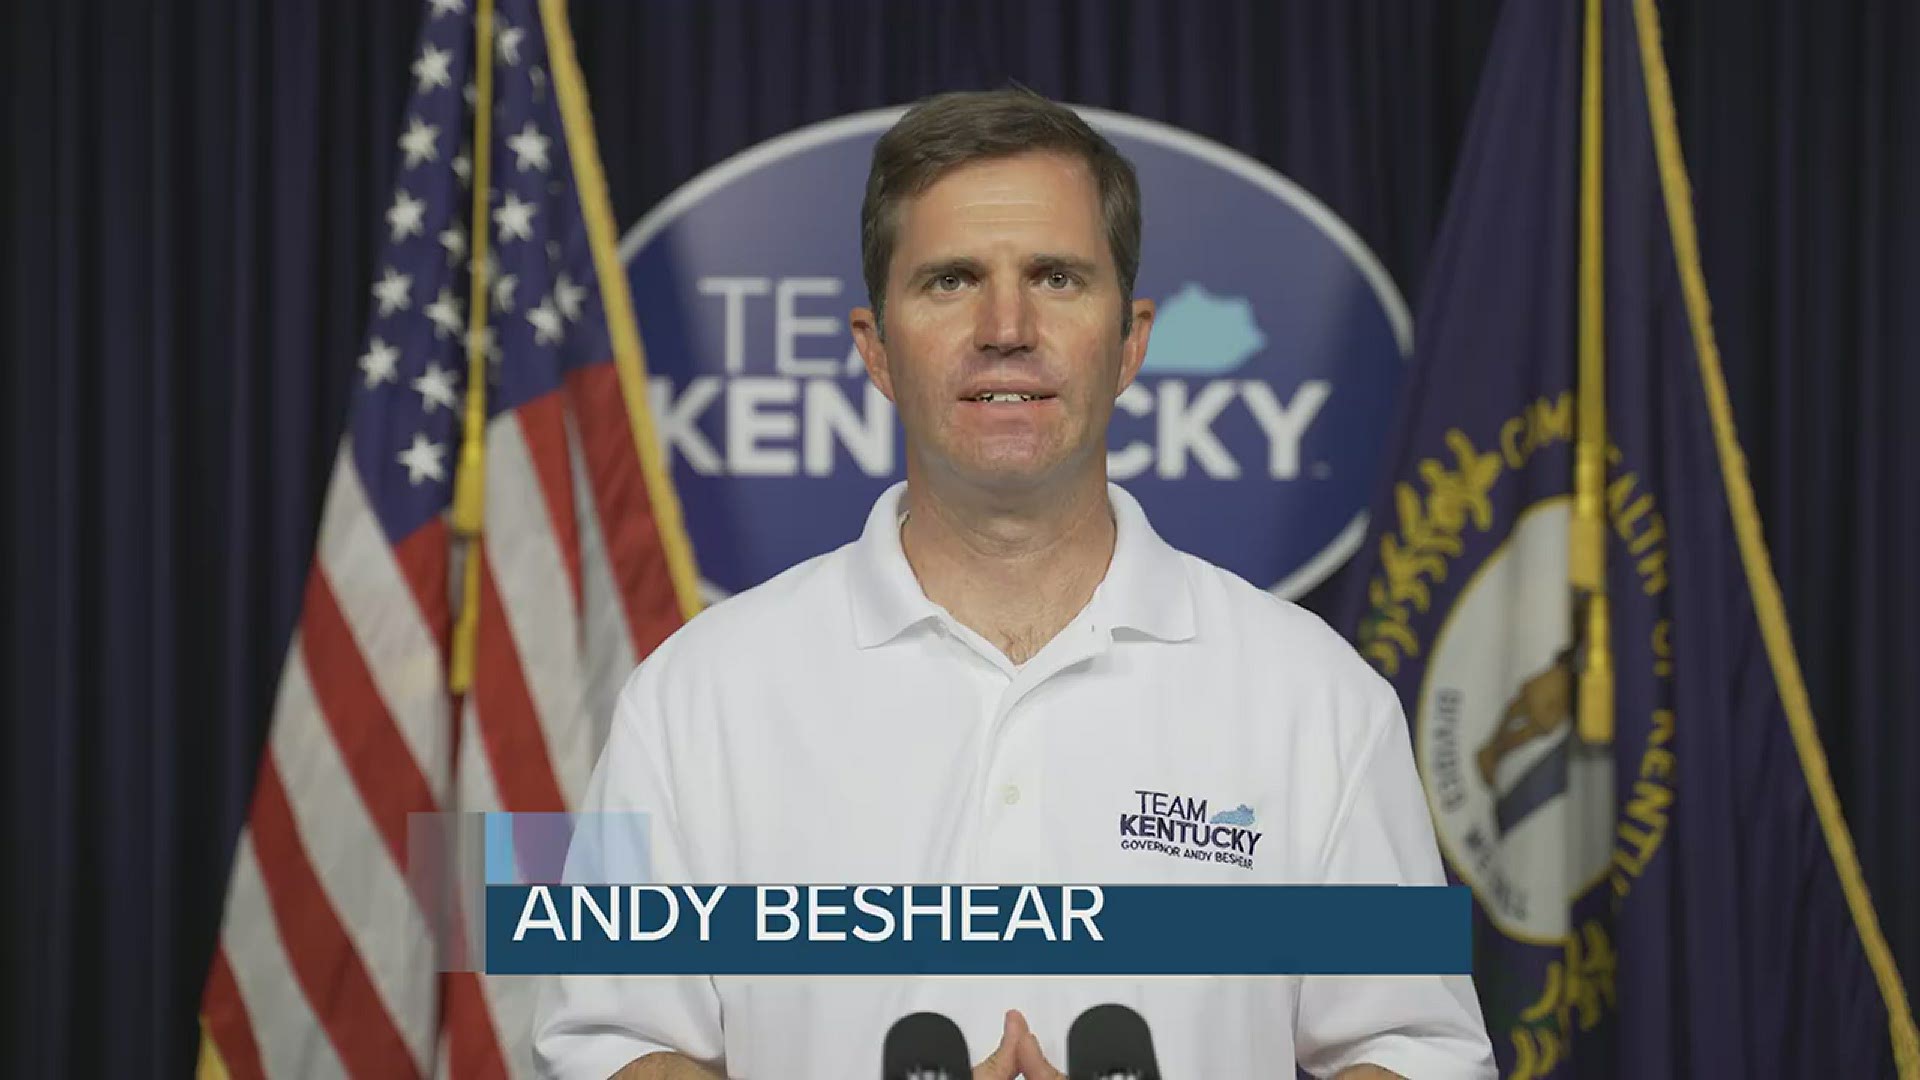 andy beshear t shirts